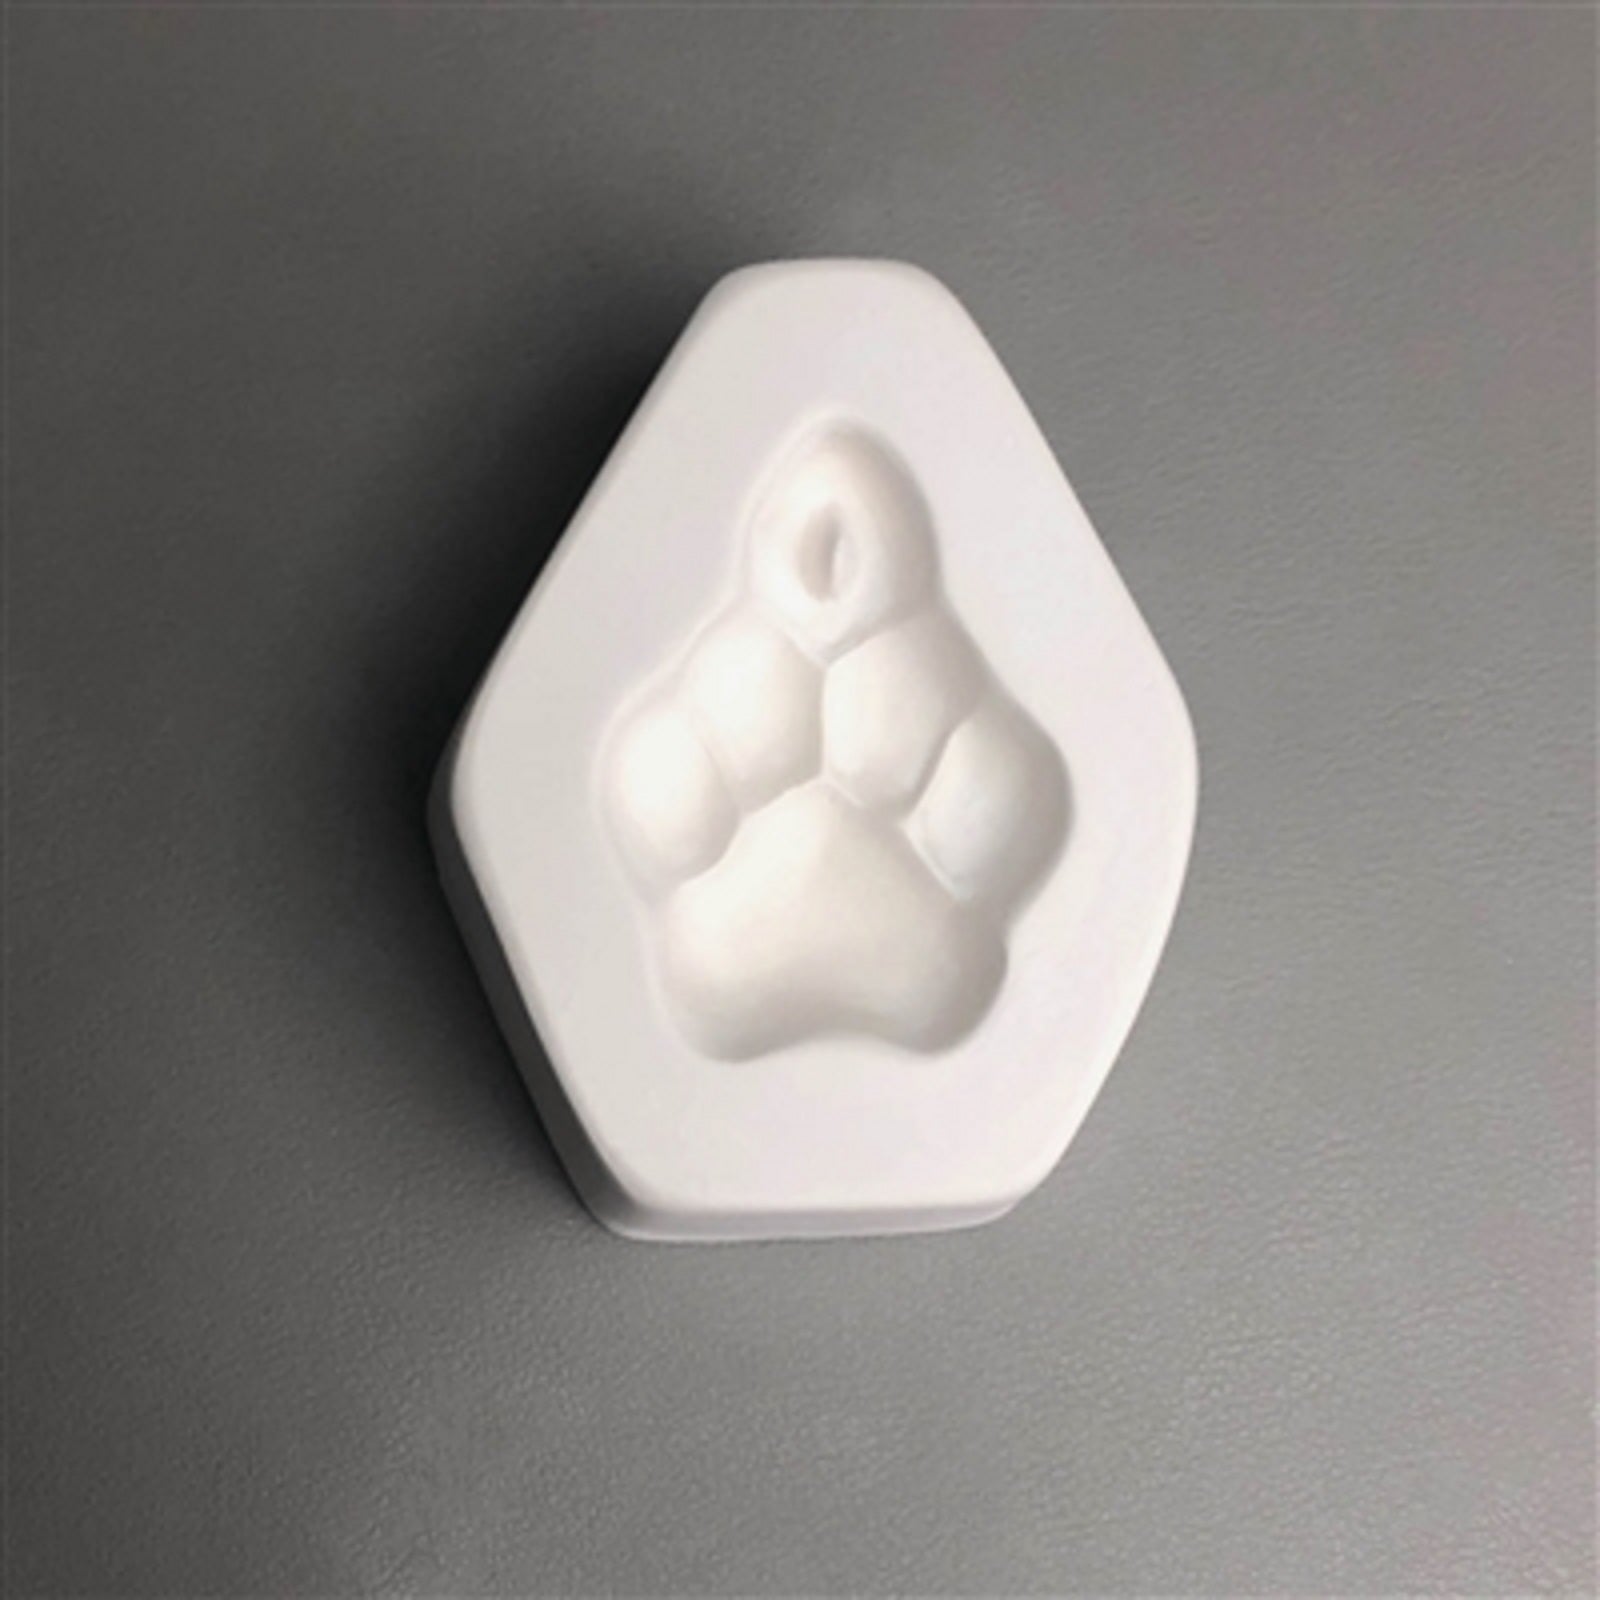 LF196 - Pet Paw Holey Casting Jewelry Mold for Fusing Glass Frit - The  Avenue Stained Glass